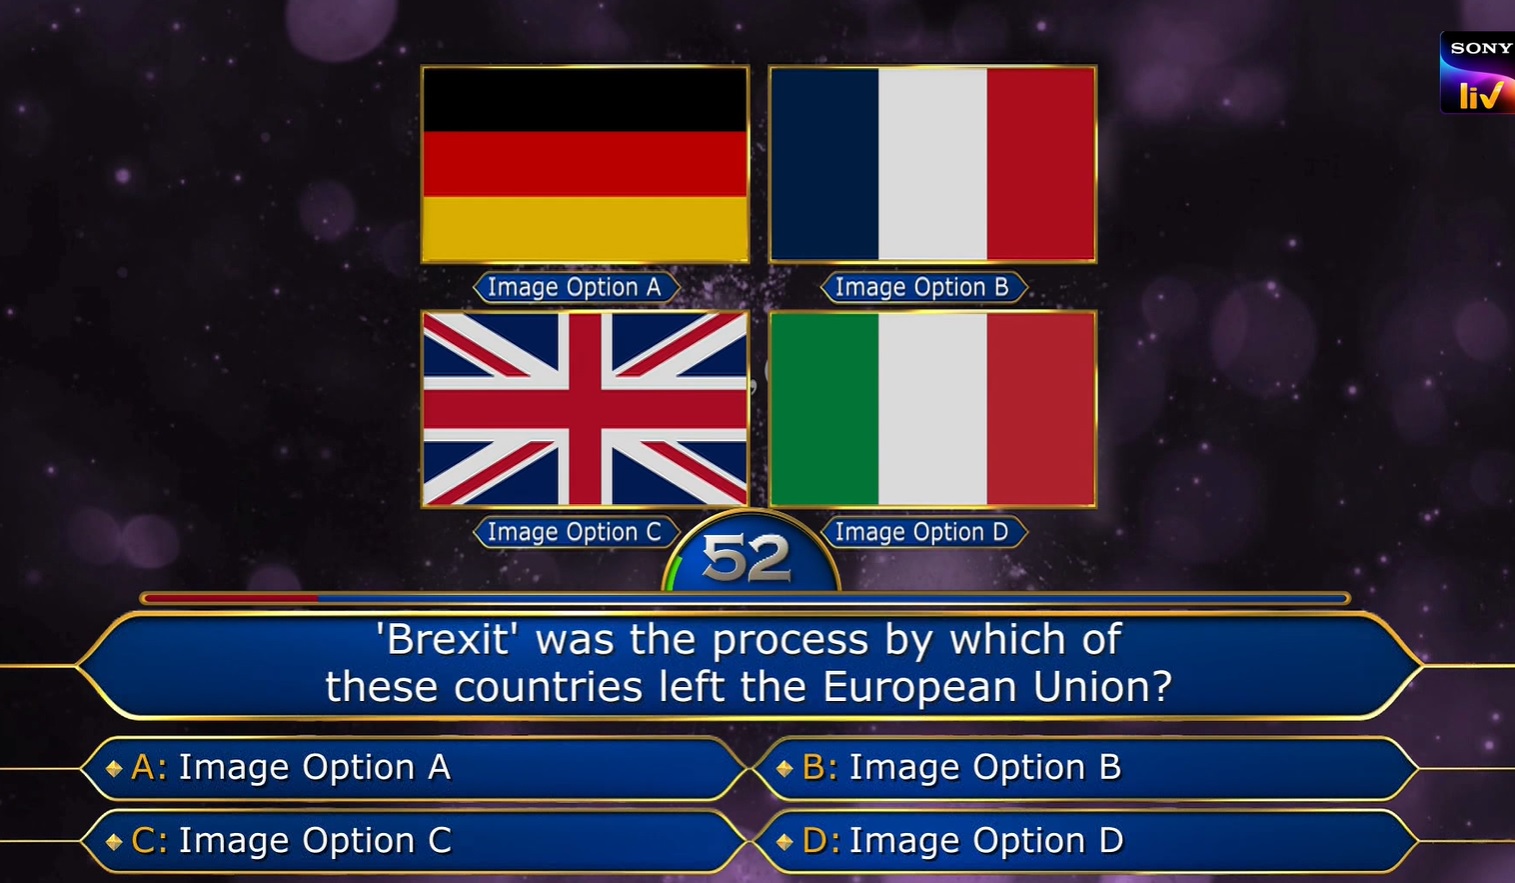 Ques : ‘Brexit’ was the process by which of these countries left the European Union?